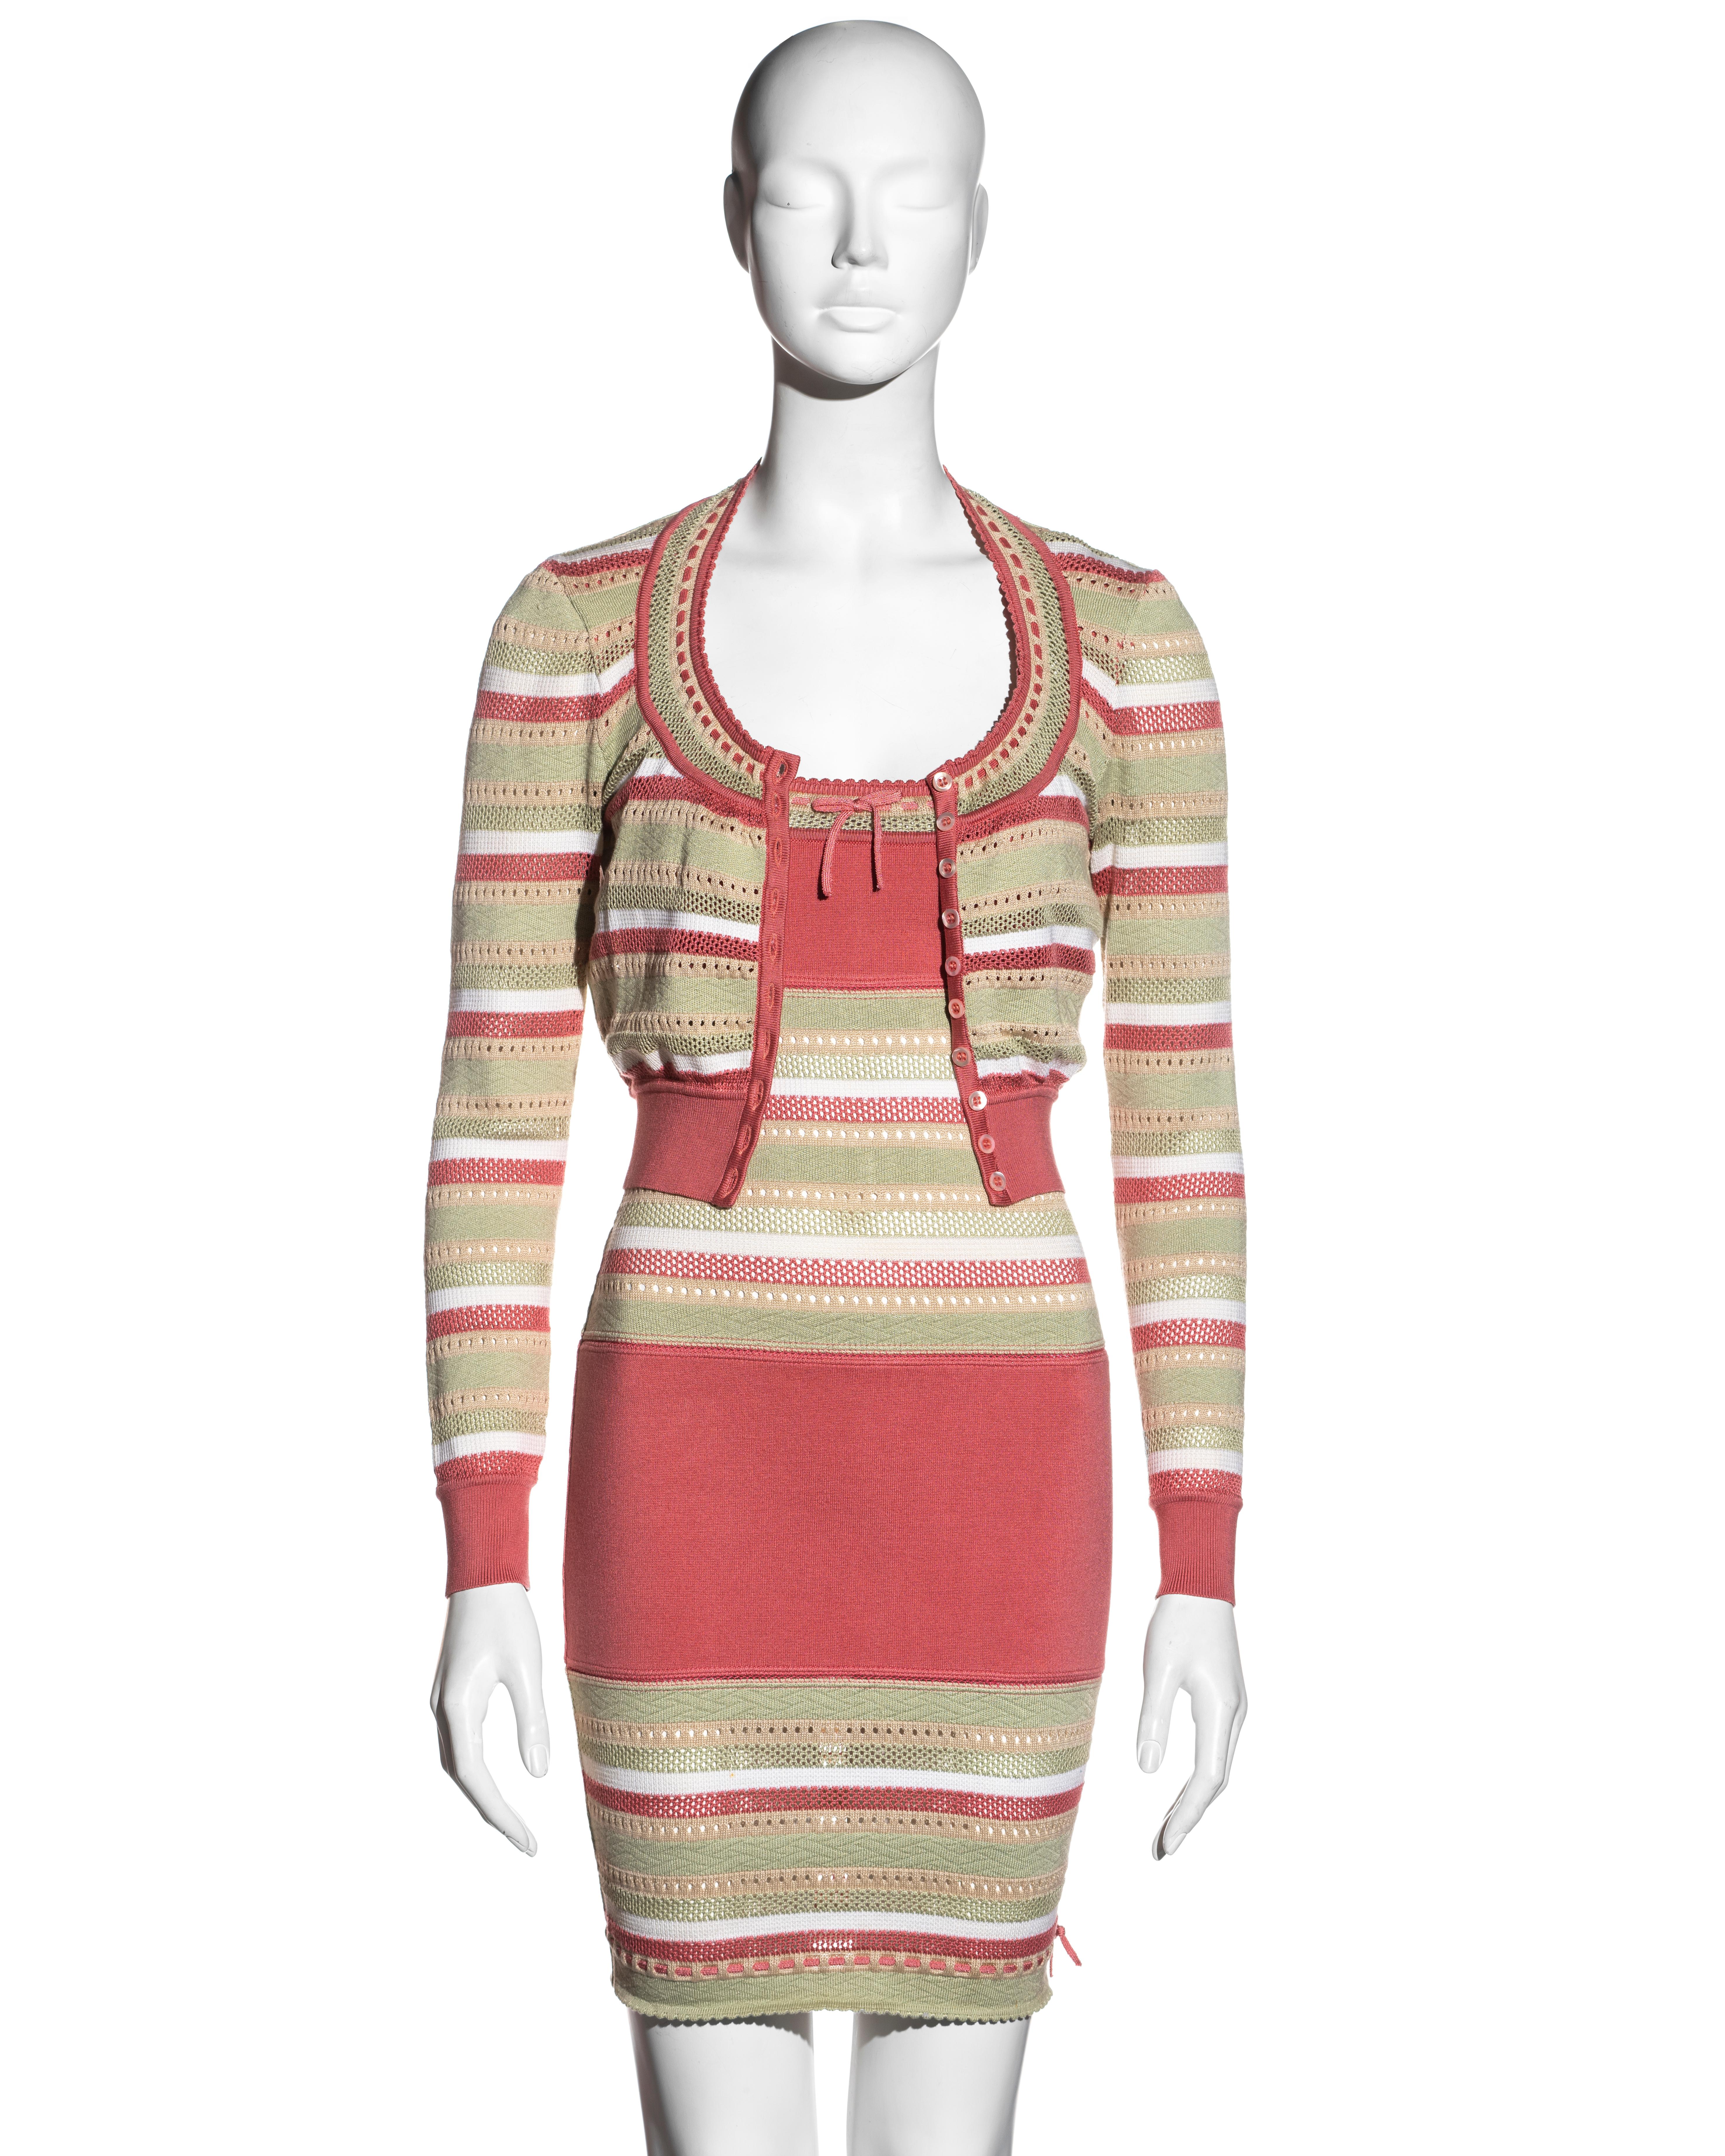 ▪ Azzedine Alaia stretch-knit dress and cardigan two-piece set
▪ Bodycon sheath dress 
▪ Cropped long-sleeve cardigan 
▪ Scoop neck 
▪ Ribbon ties at the neck and hem 
▪ Open-knit in pistachio, lemon, coral, and white stripes 
▪ Size Small
▪ 85%